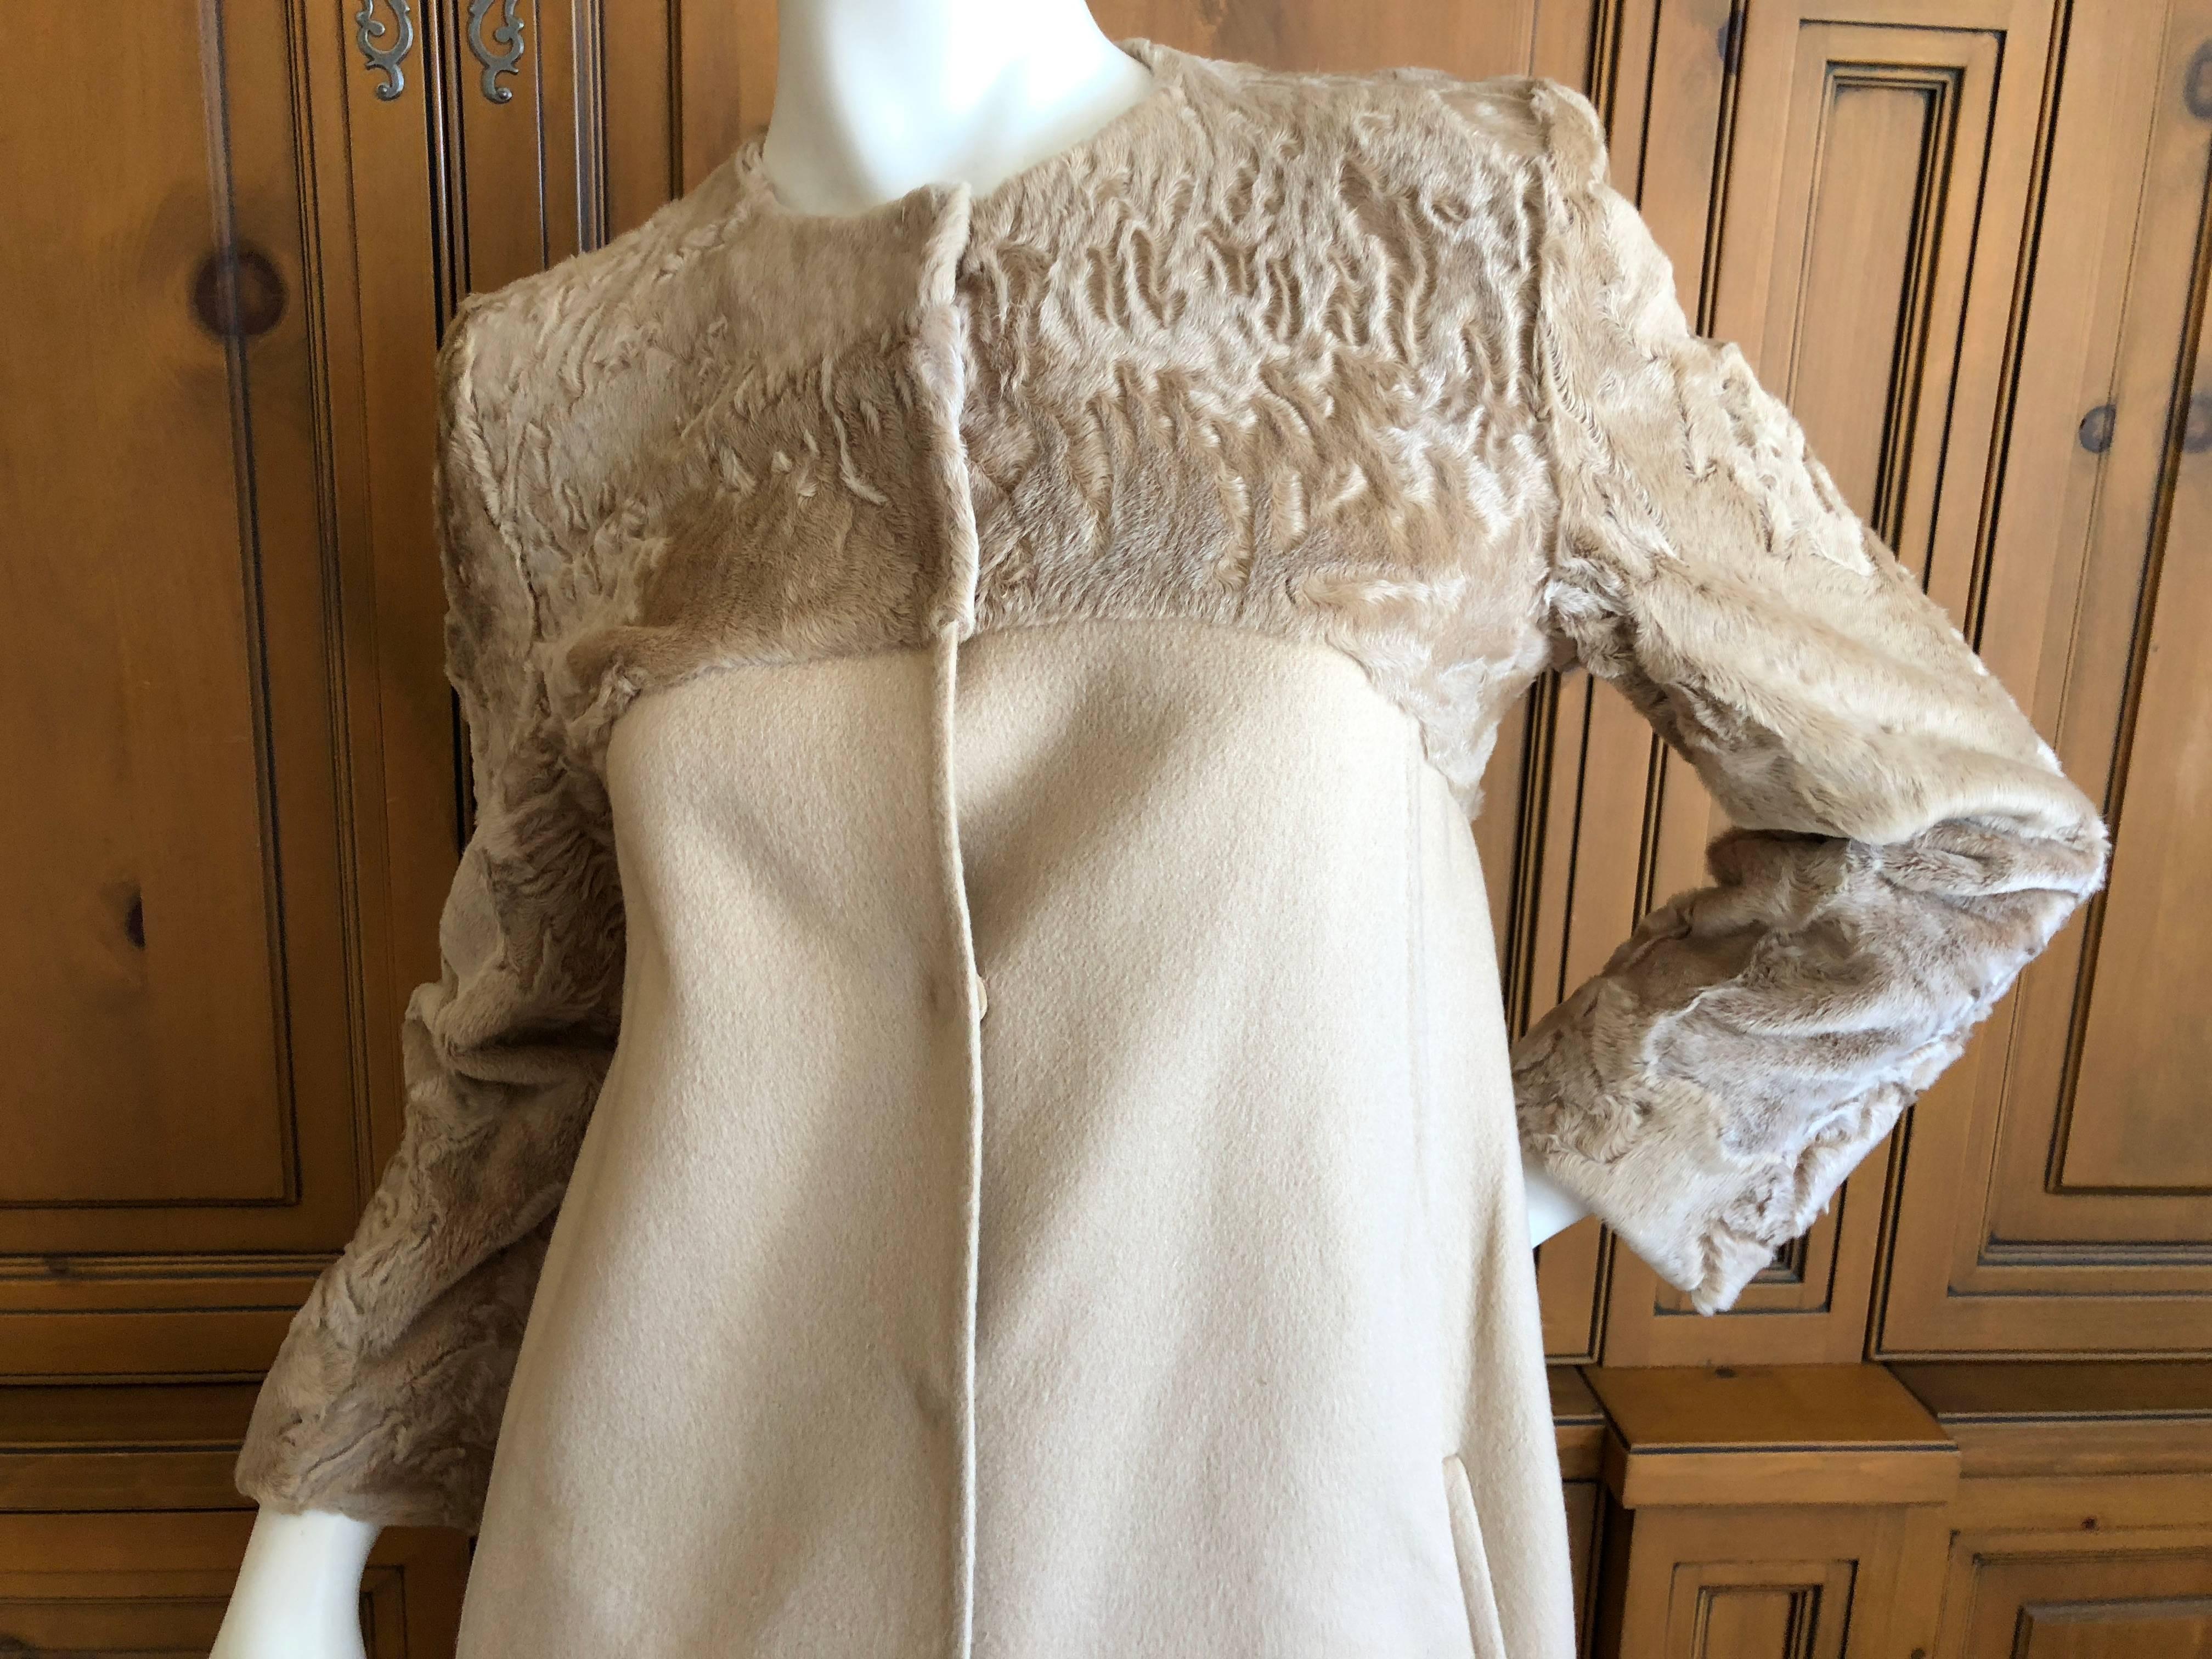 Fendi Elegant Pure Cashmere Coat with Broadtail Lamb Fur Trim by Lagerfeld In Excellent Condition For Sale In Cloverdale, CA